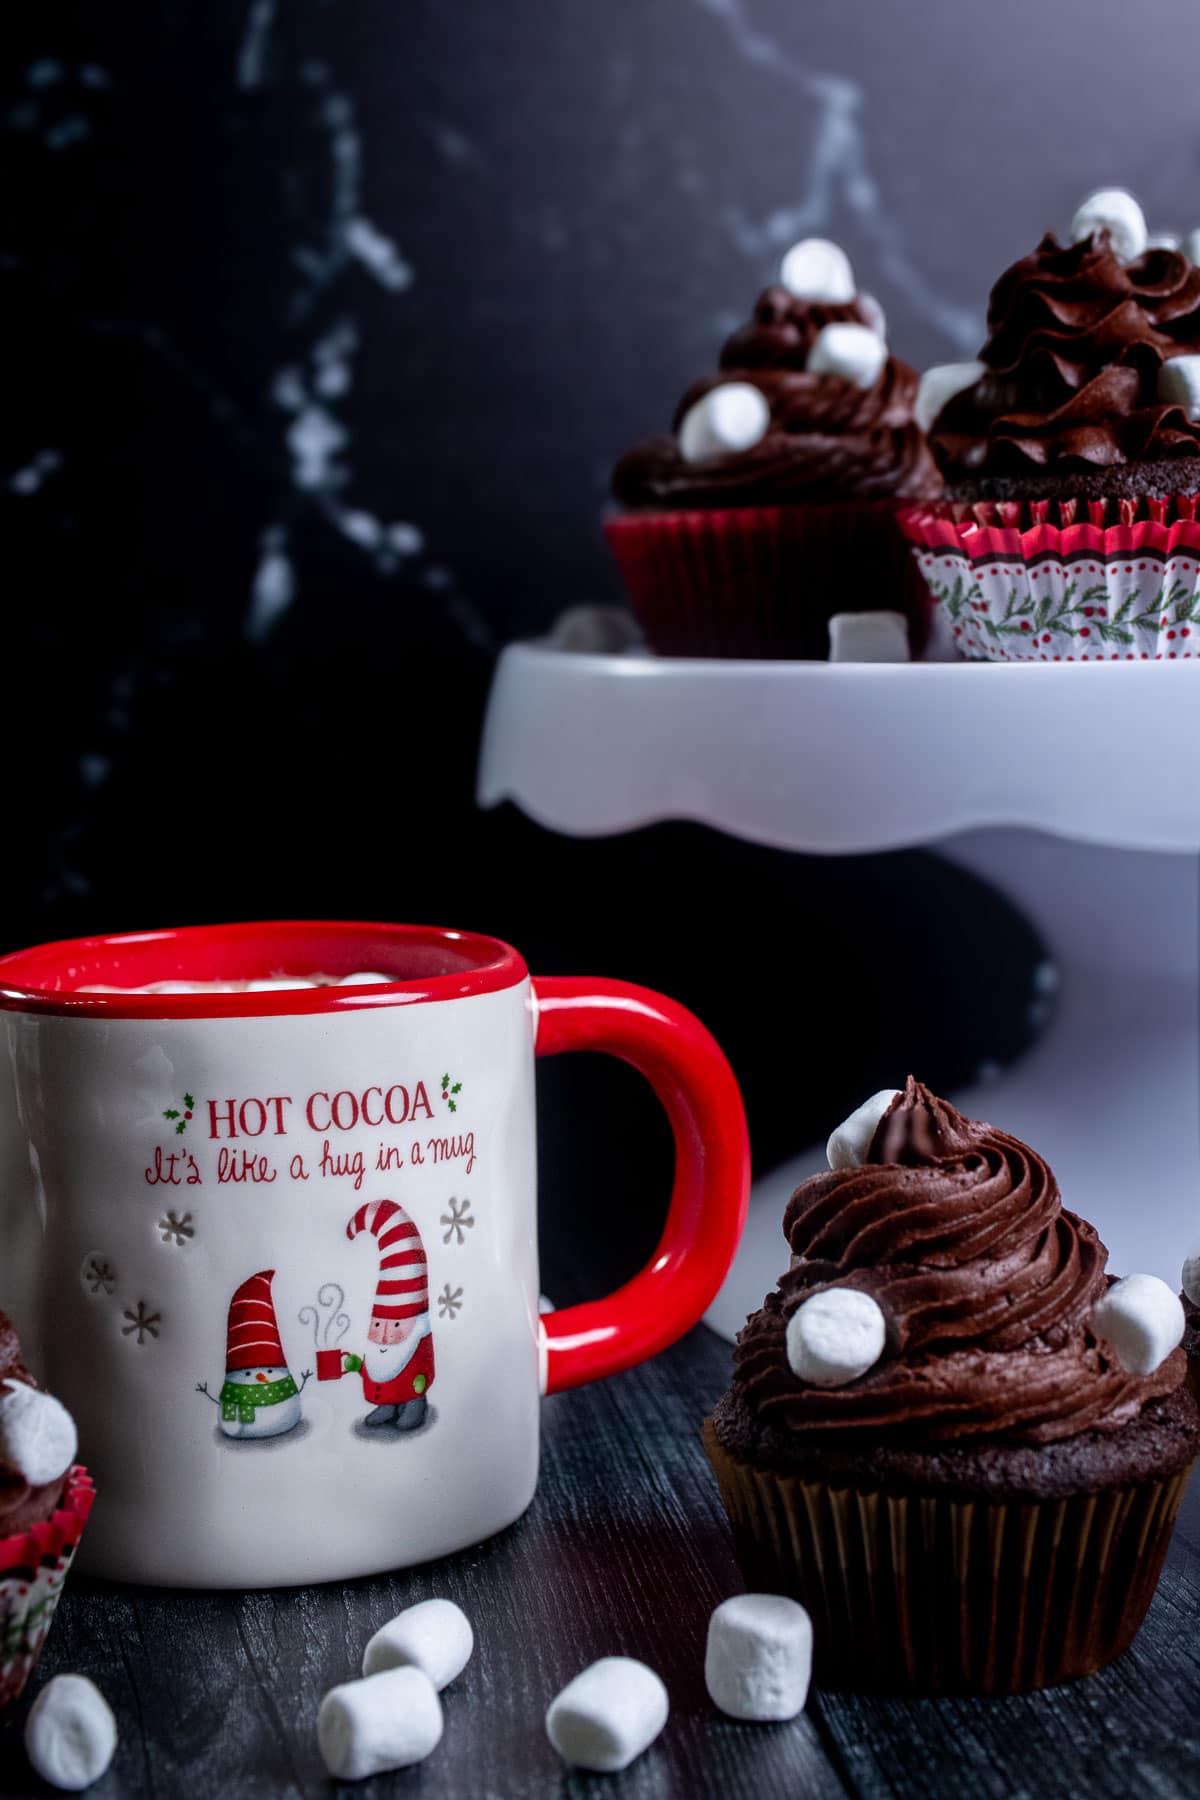 Wide shot of hot cocoa cupcakes next to a mug of hot chocolate with more cupcakes on a white cake stand behind them.